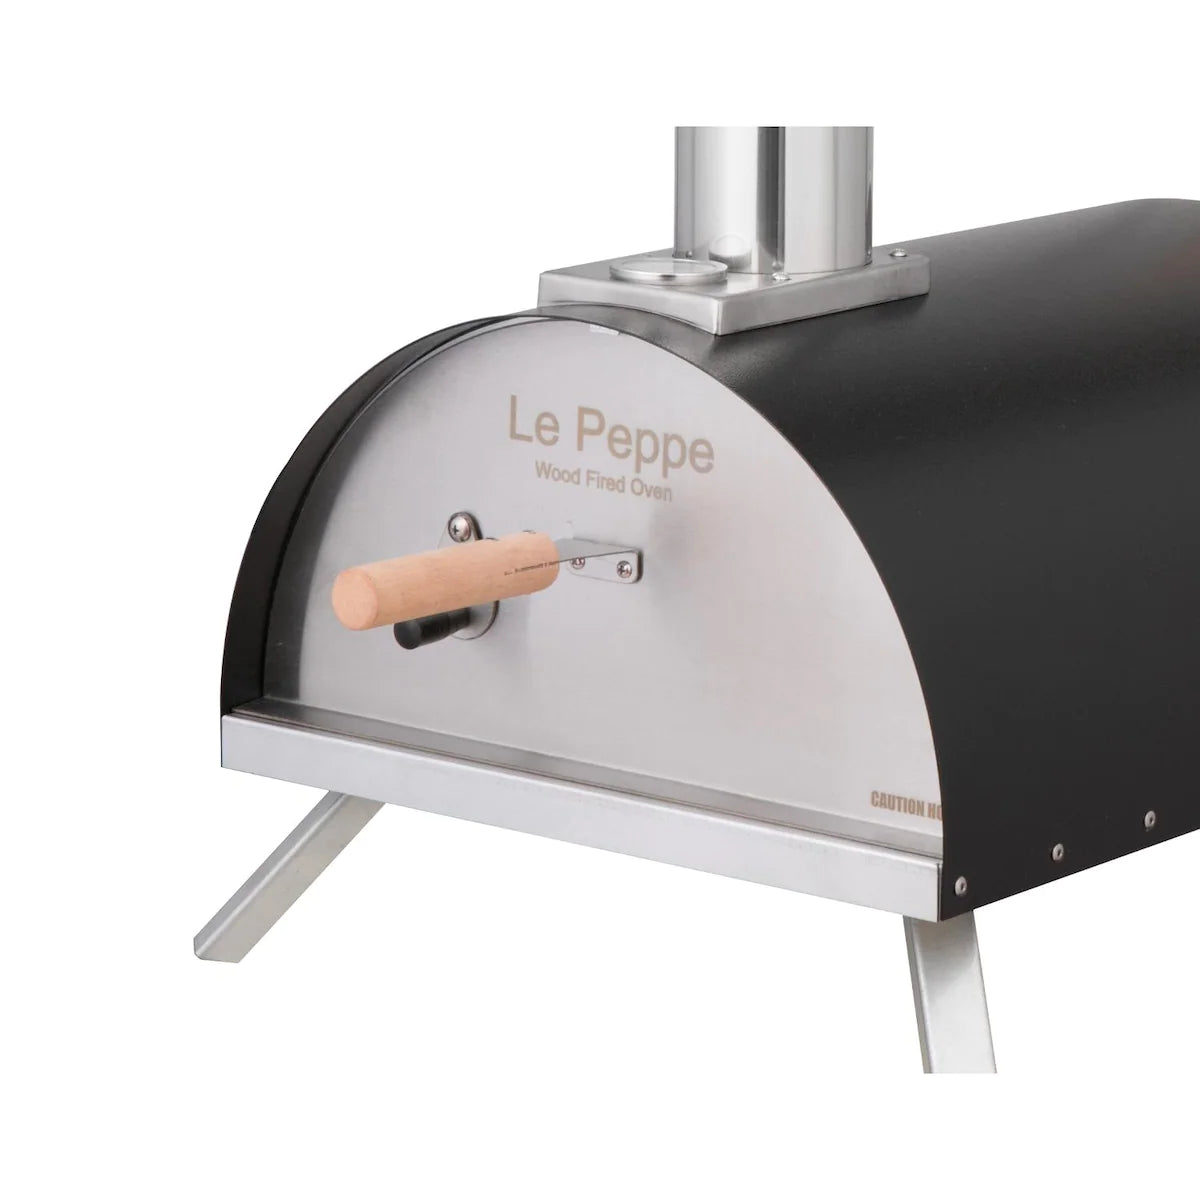 WPPO Le Peppe Portable Wood Fired Pizza Oven with Oven Door in place